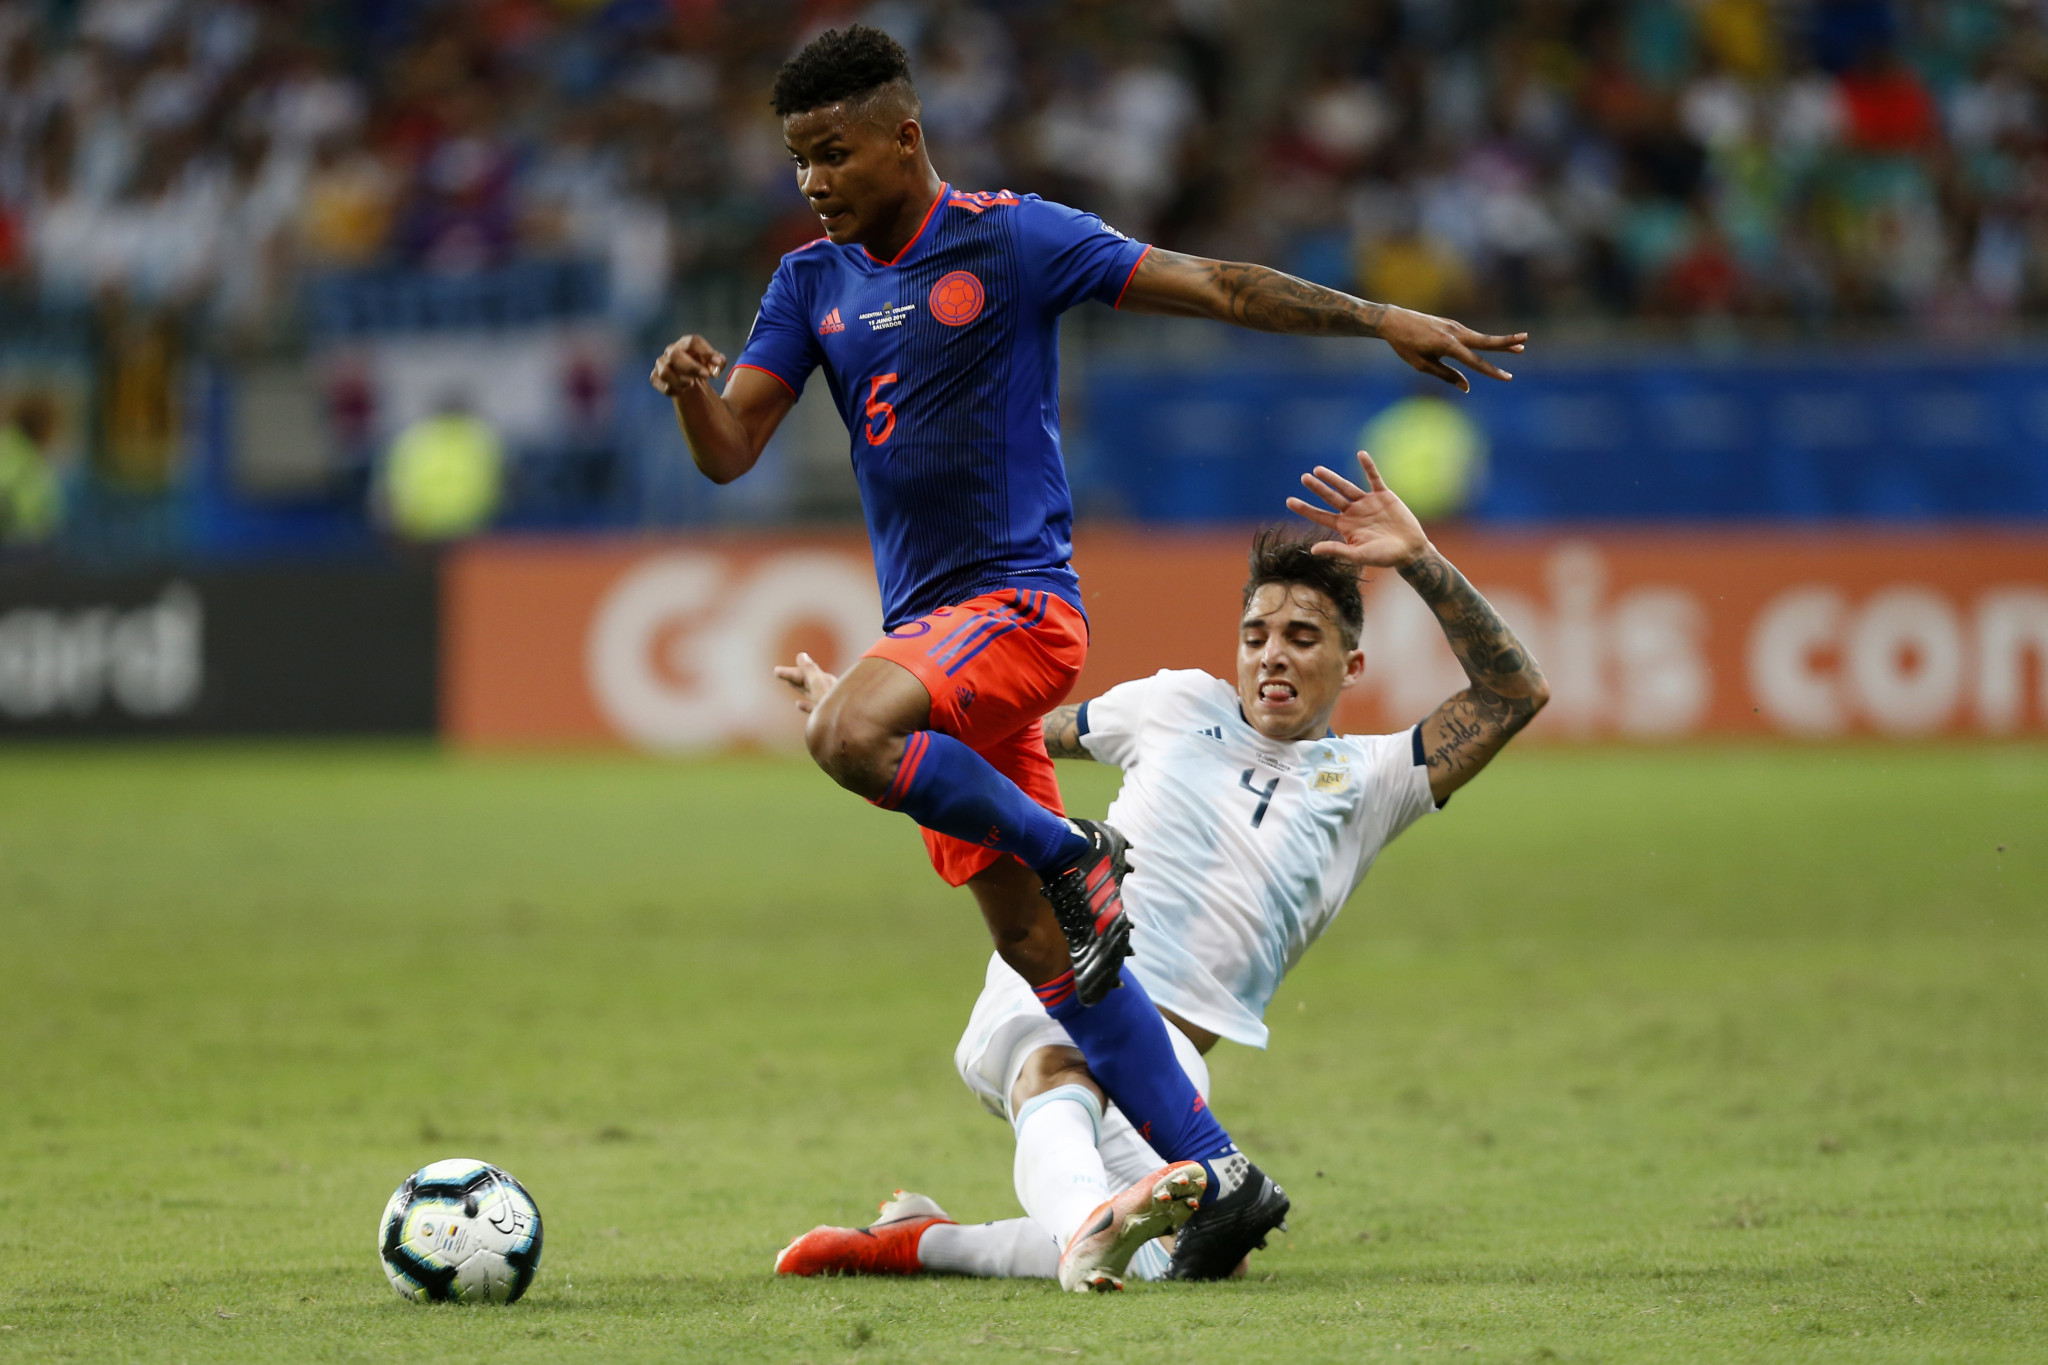 Colombia secure late victory against star-studded Argentinian team at Copa América